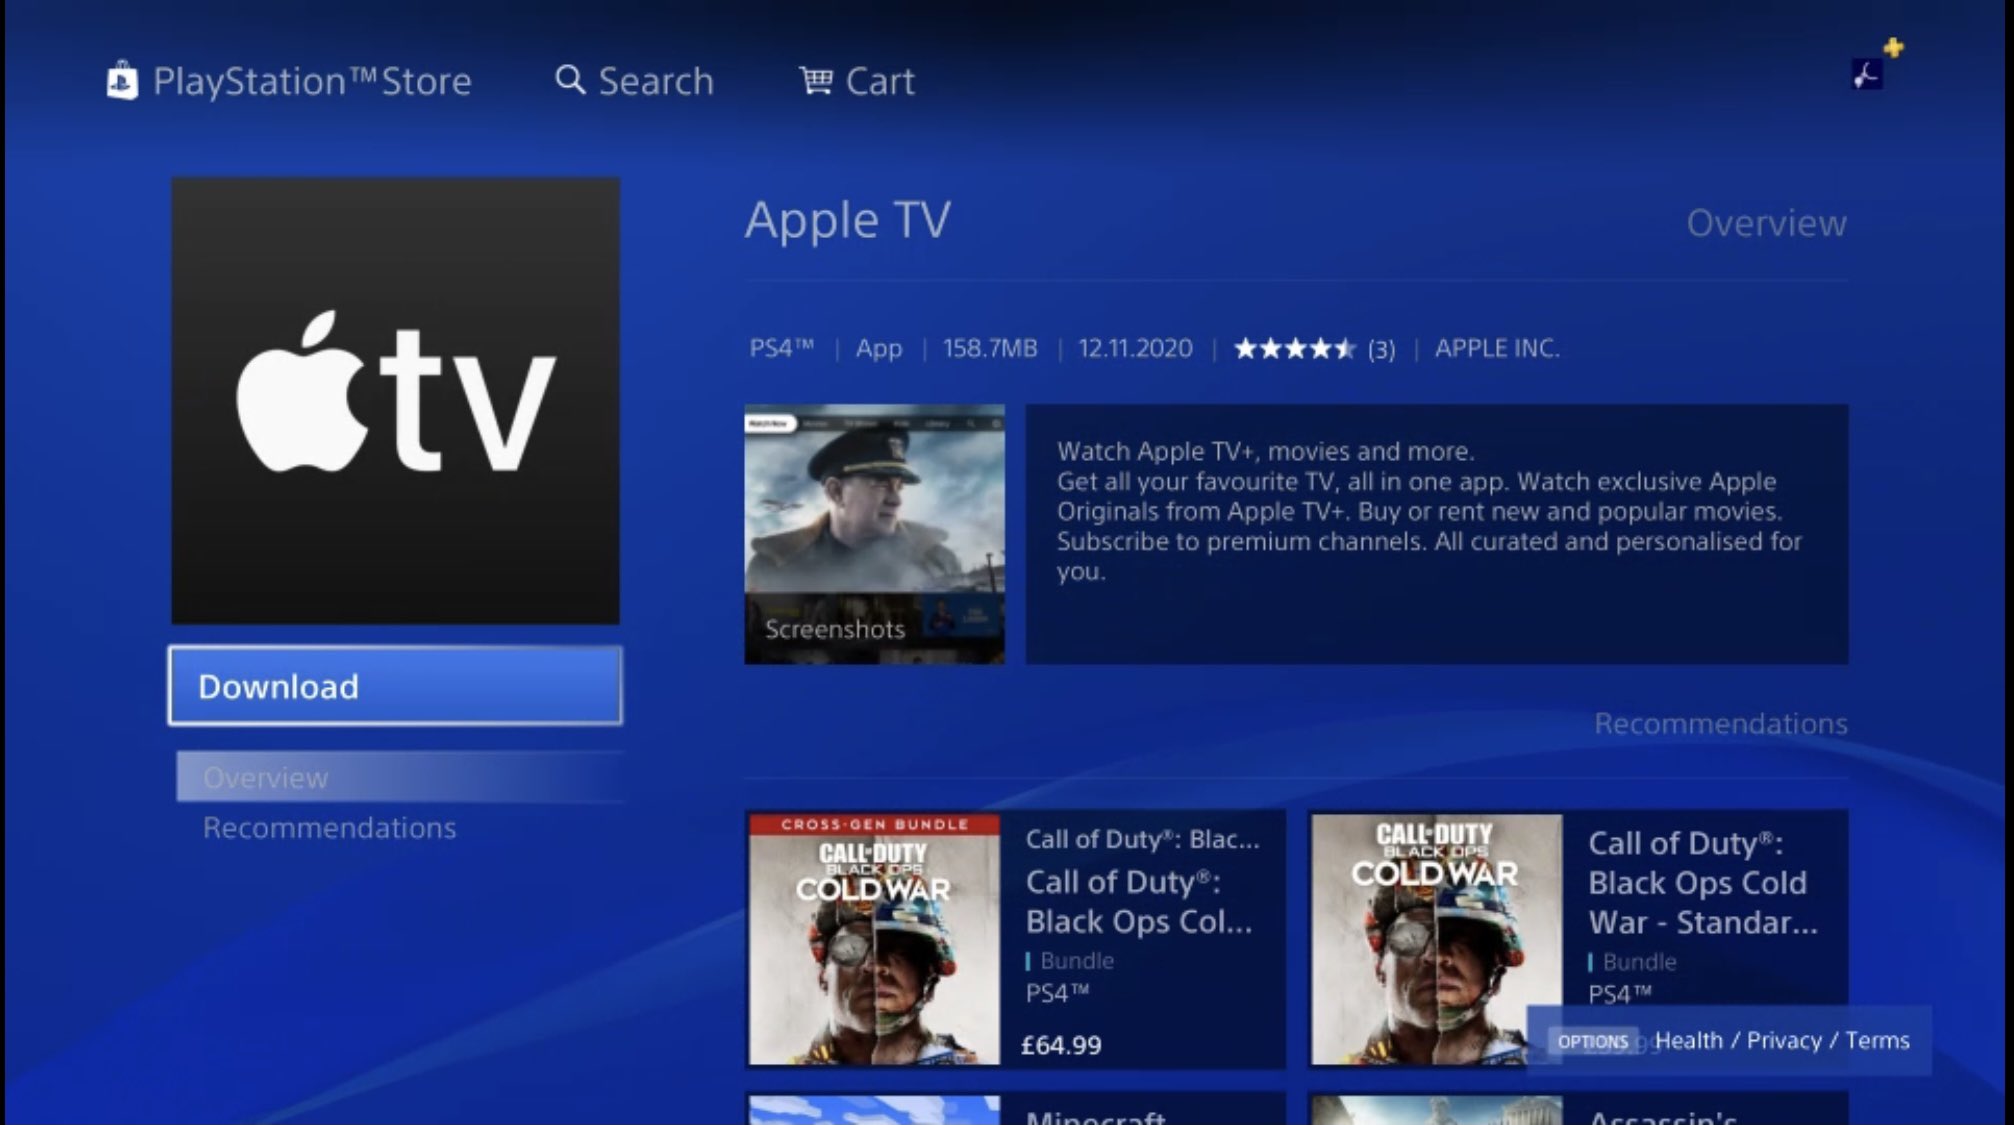 Three-Month of Apple TV+ Available to PlayStation 4 Owners